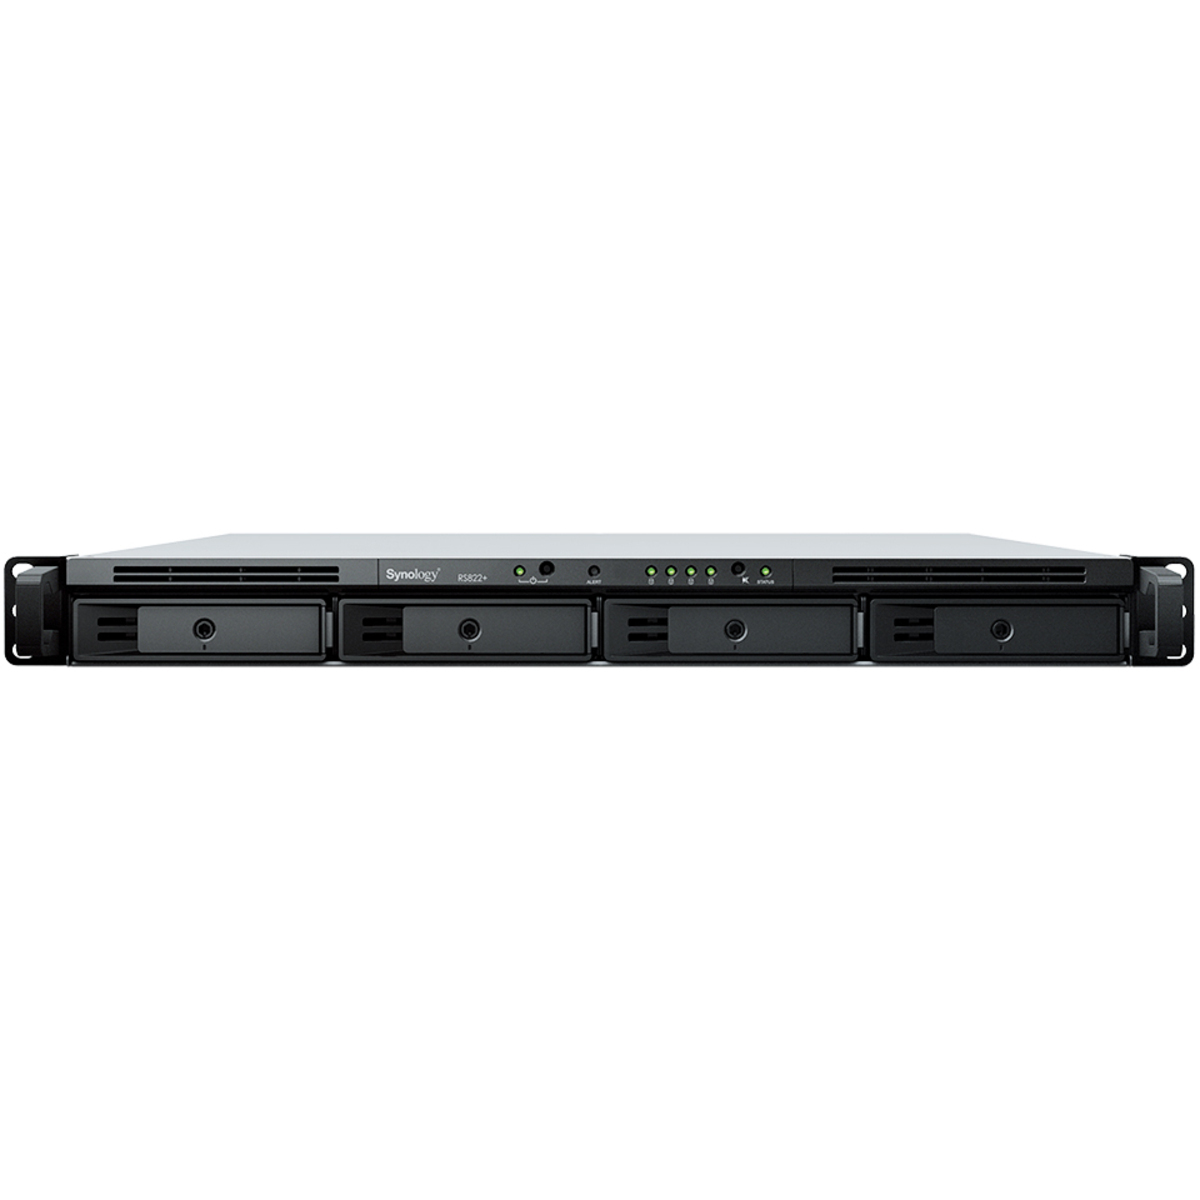 Synology RackStation RS822RP+ 40tb 4-Bay RackMount Multimedia / Power User / Business NAS - Network Attached Storage Device 4x10tb Seagate IronWolf Pro ST10000NT001 3.5 7200rpm SATA 6Gb/s HDD NAS Class Drives Installed - Burn-In Tested - ON SALE - FREE RAM UPGRADE RackStation RS822RP+